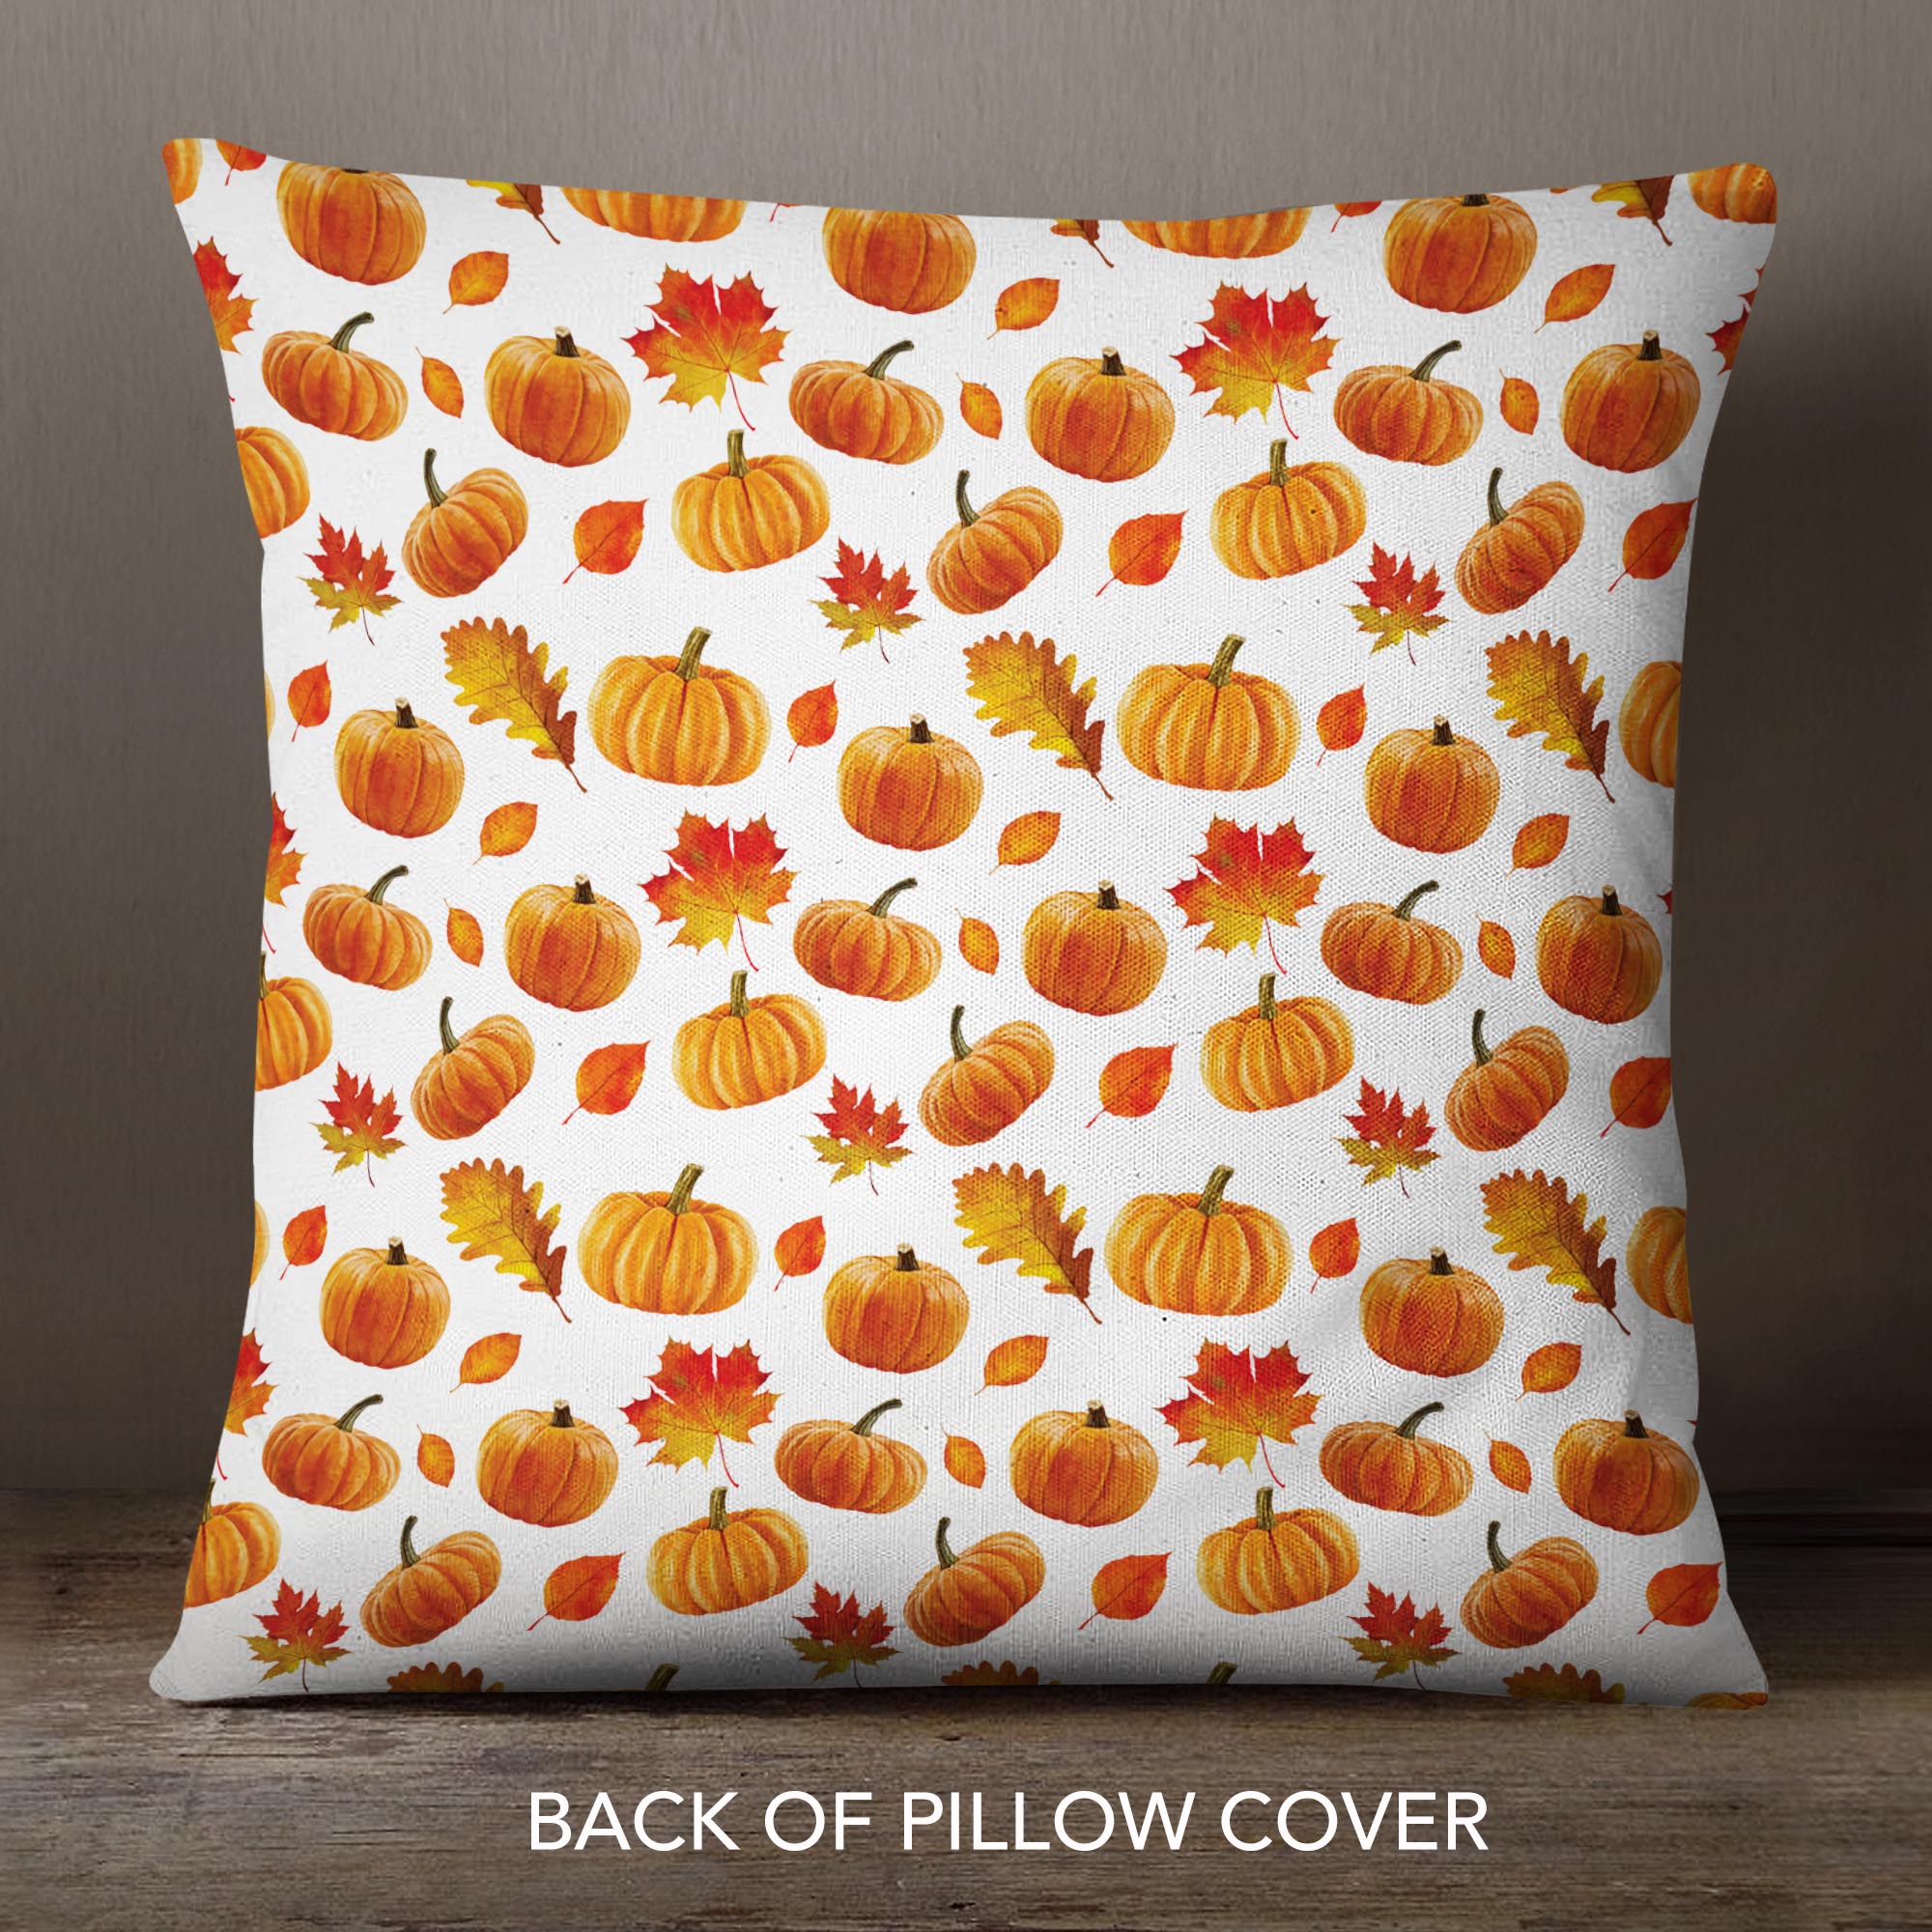 Orange Painted Pumpkins - Decorative Pillow Cover - 18x18 in